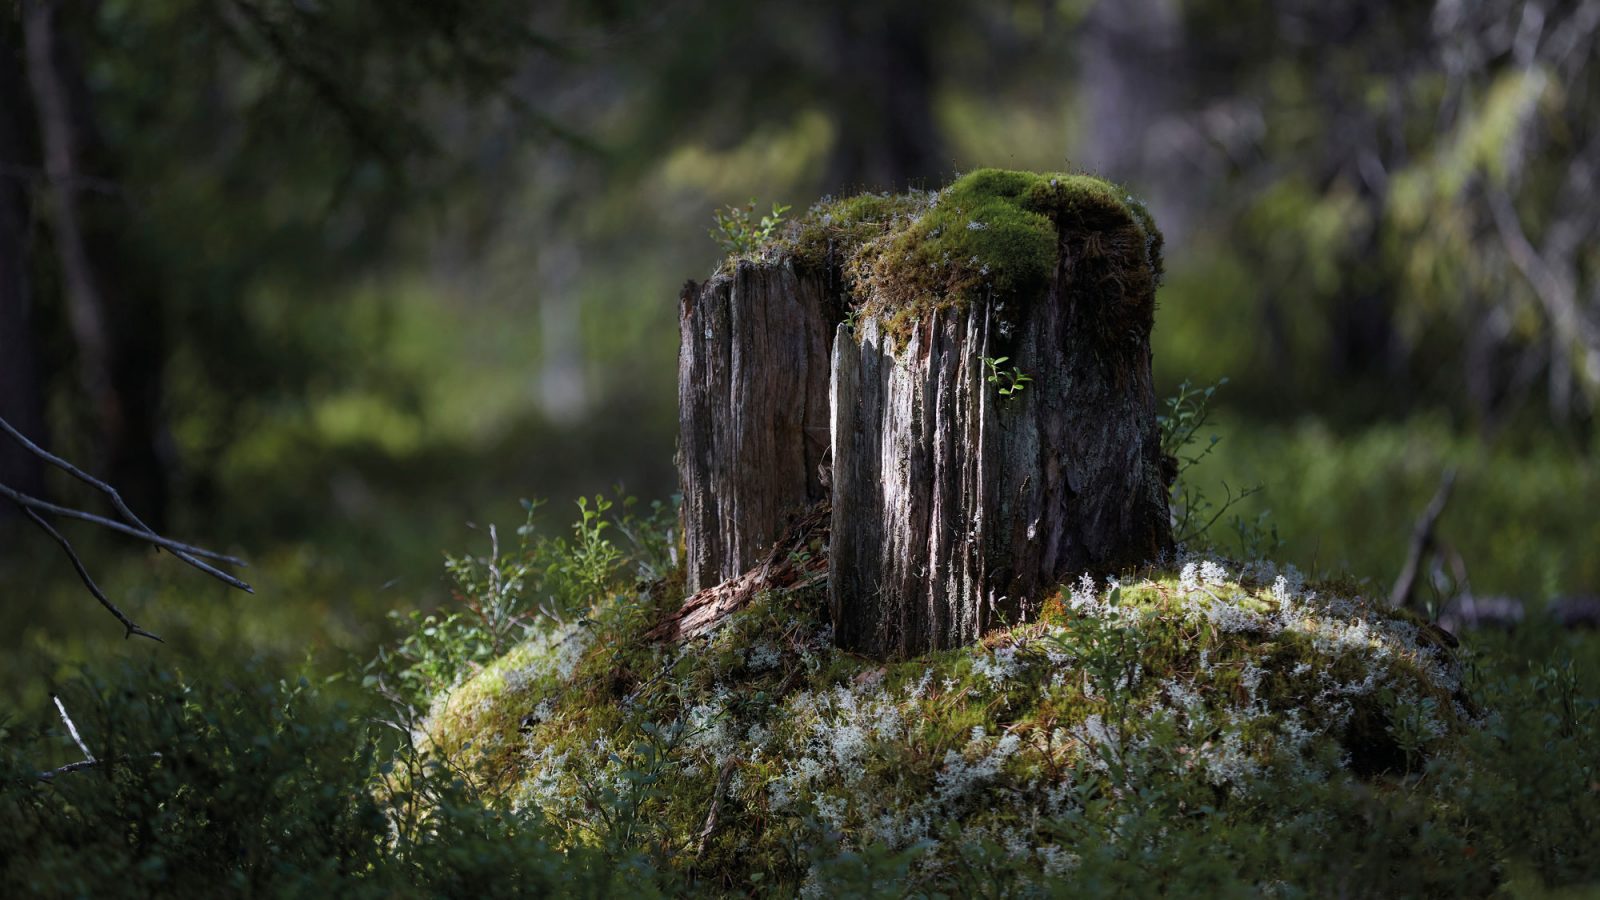 Sunbeams shine on a moss-covered stump in a forest.